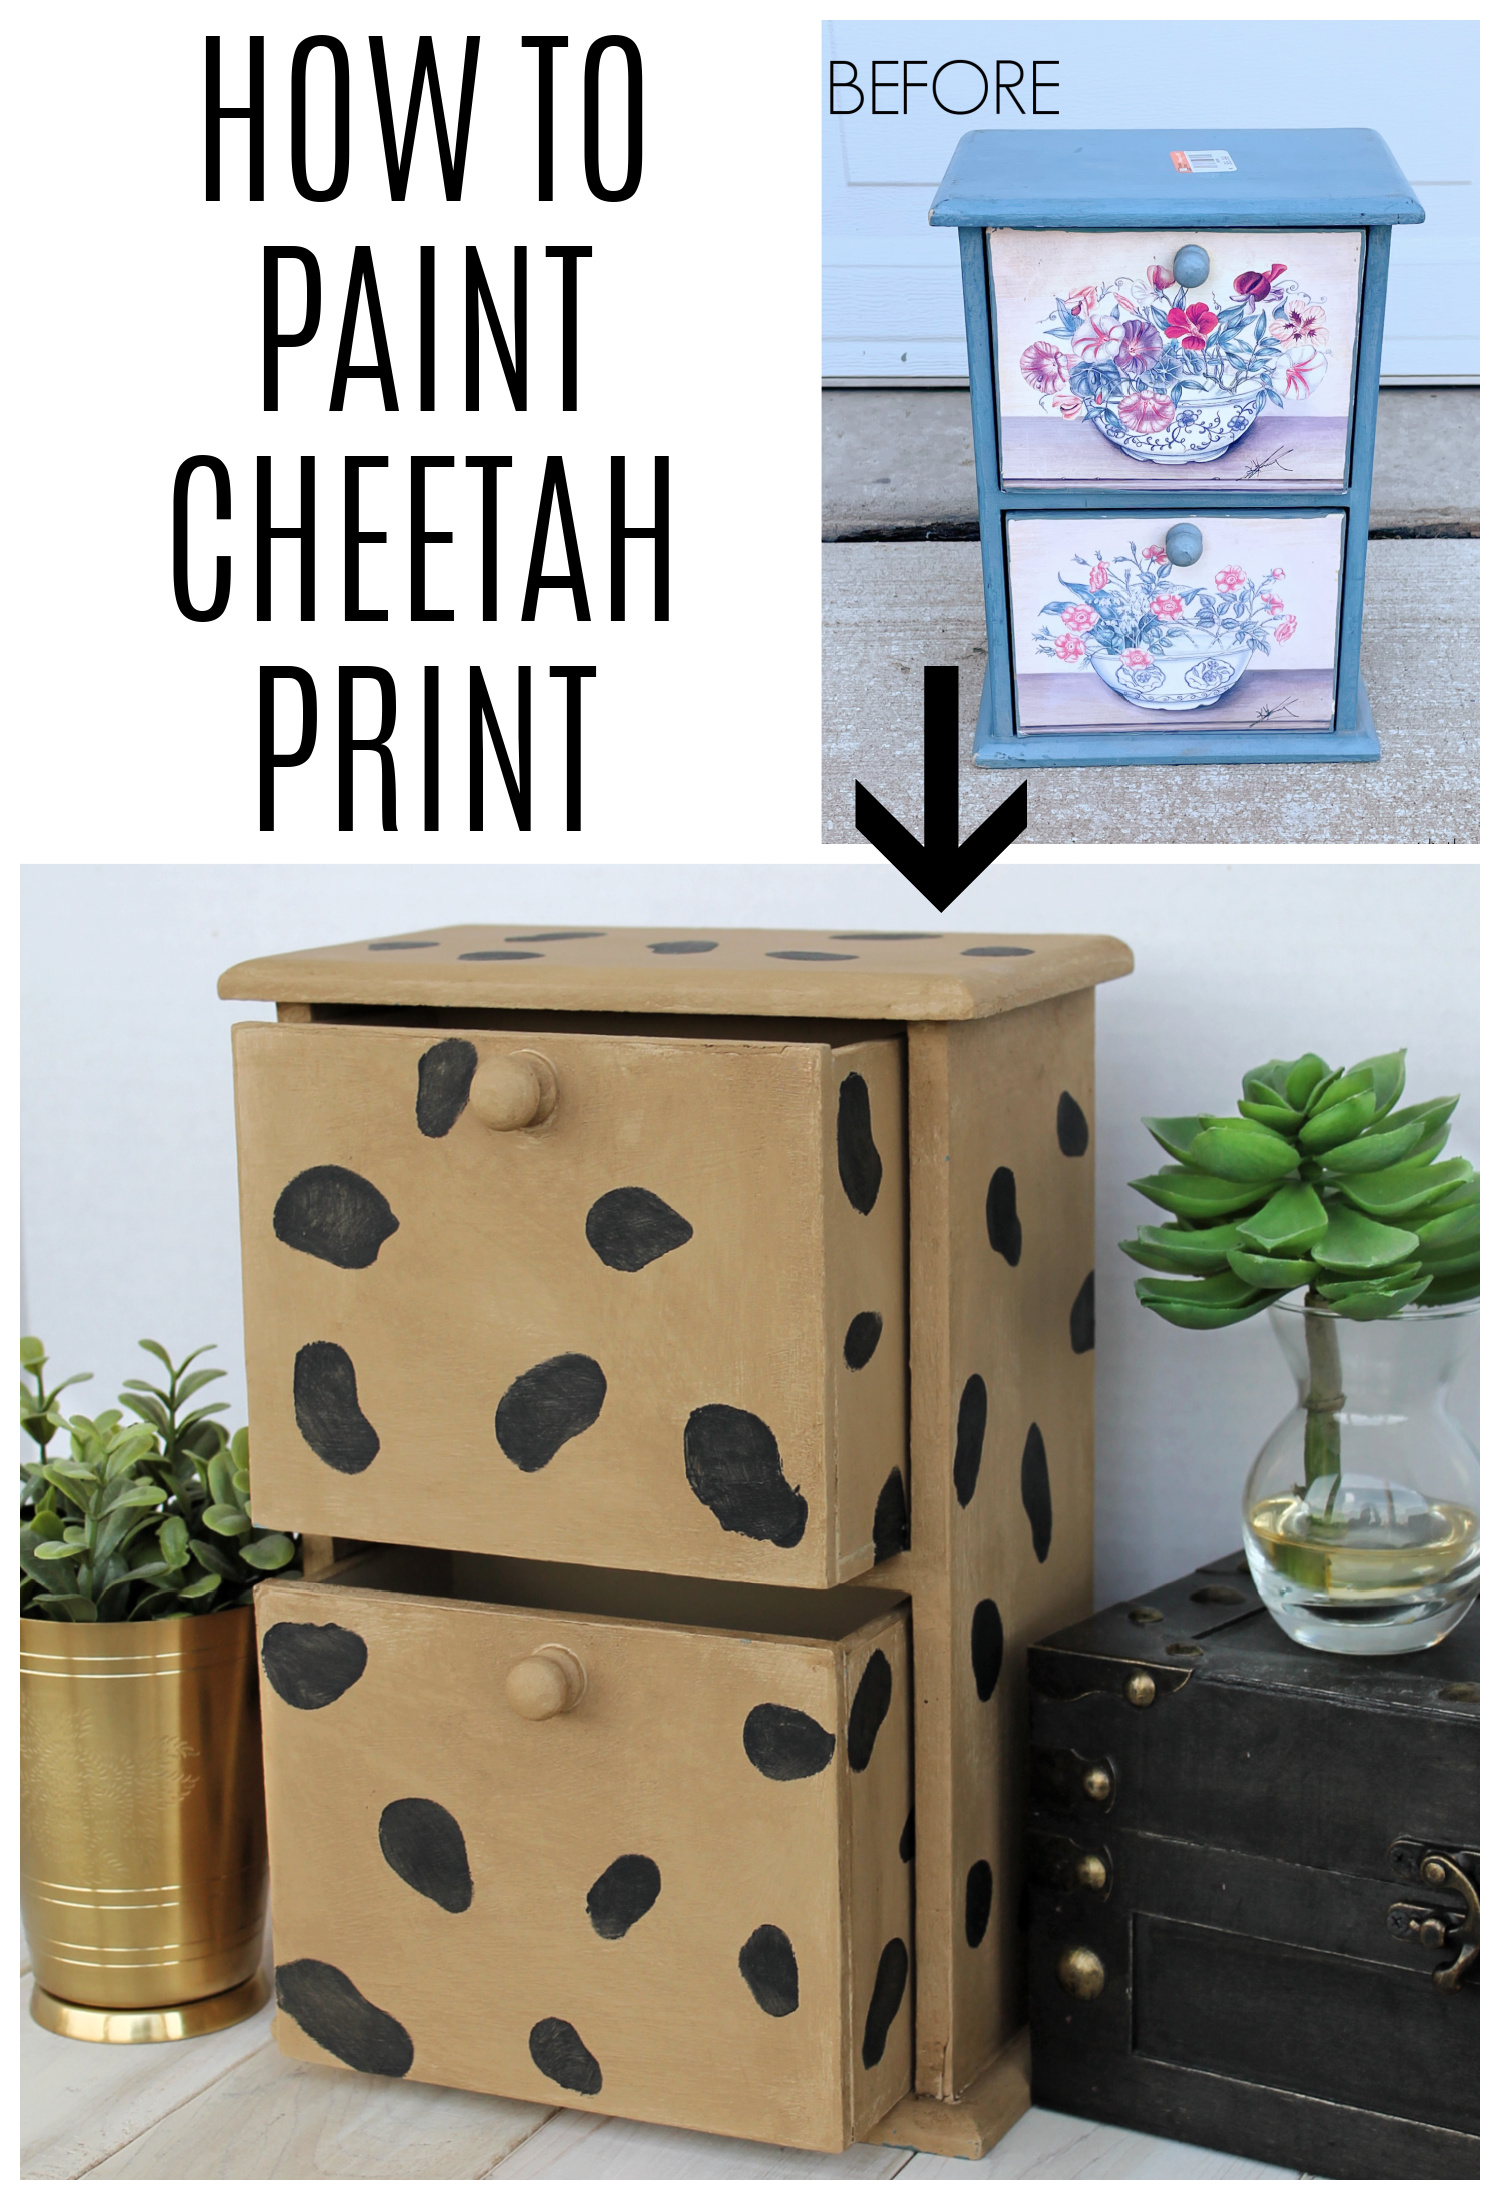 Learn how painting a cheetah print can transform a boring wooden box easily with the right technique. Use animal print to upcycle chic home decor. By Girl in the Garage